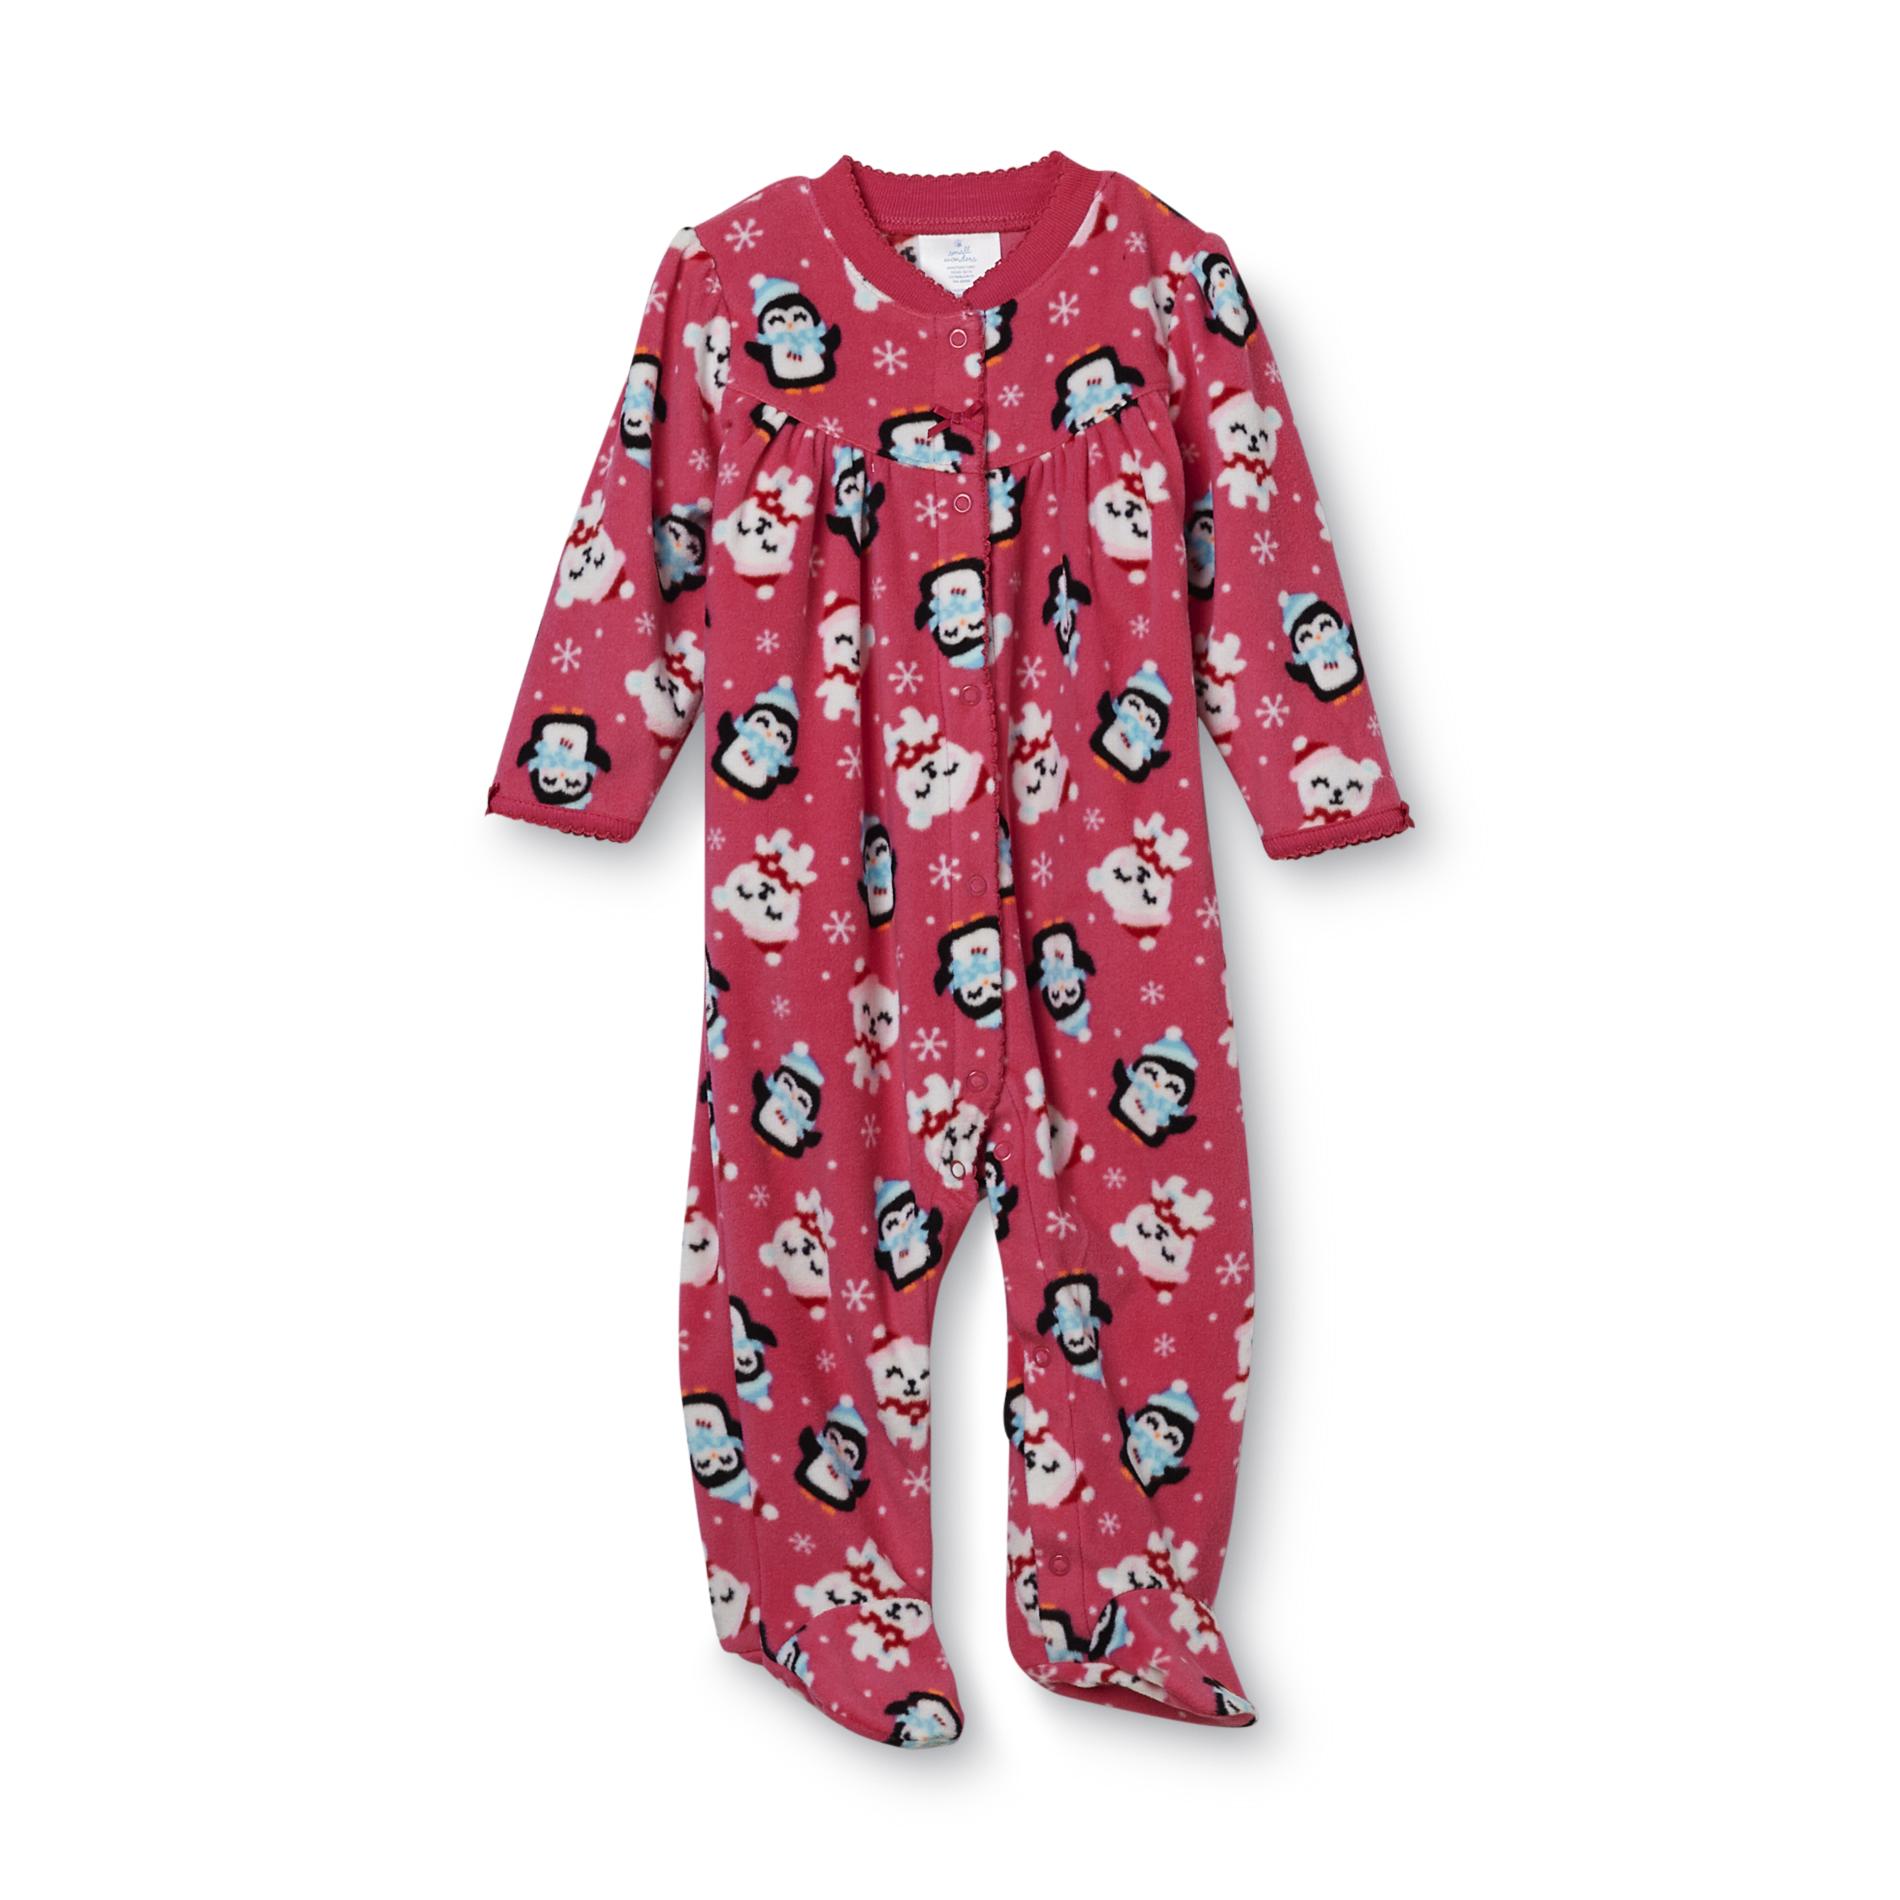 Small Wonders Infant Girls' Arctic Animals & Snowflake Footed Sleeper